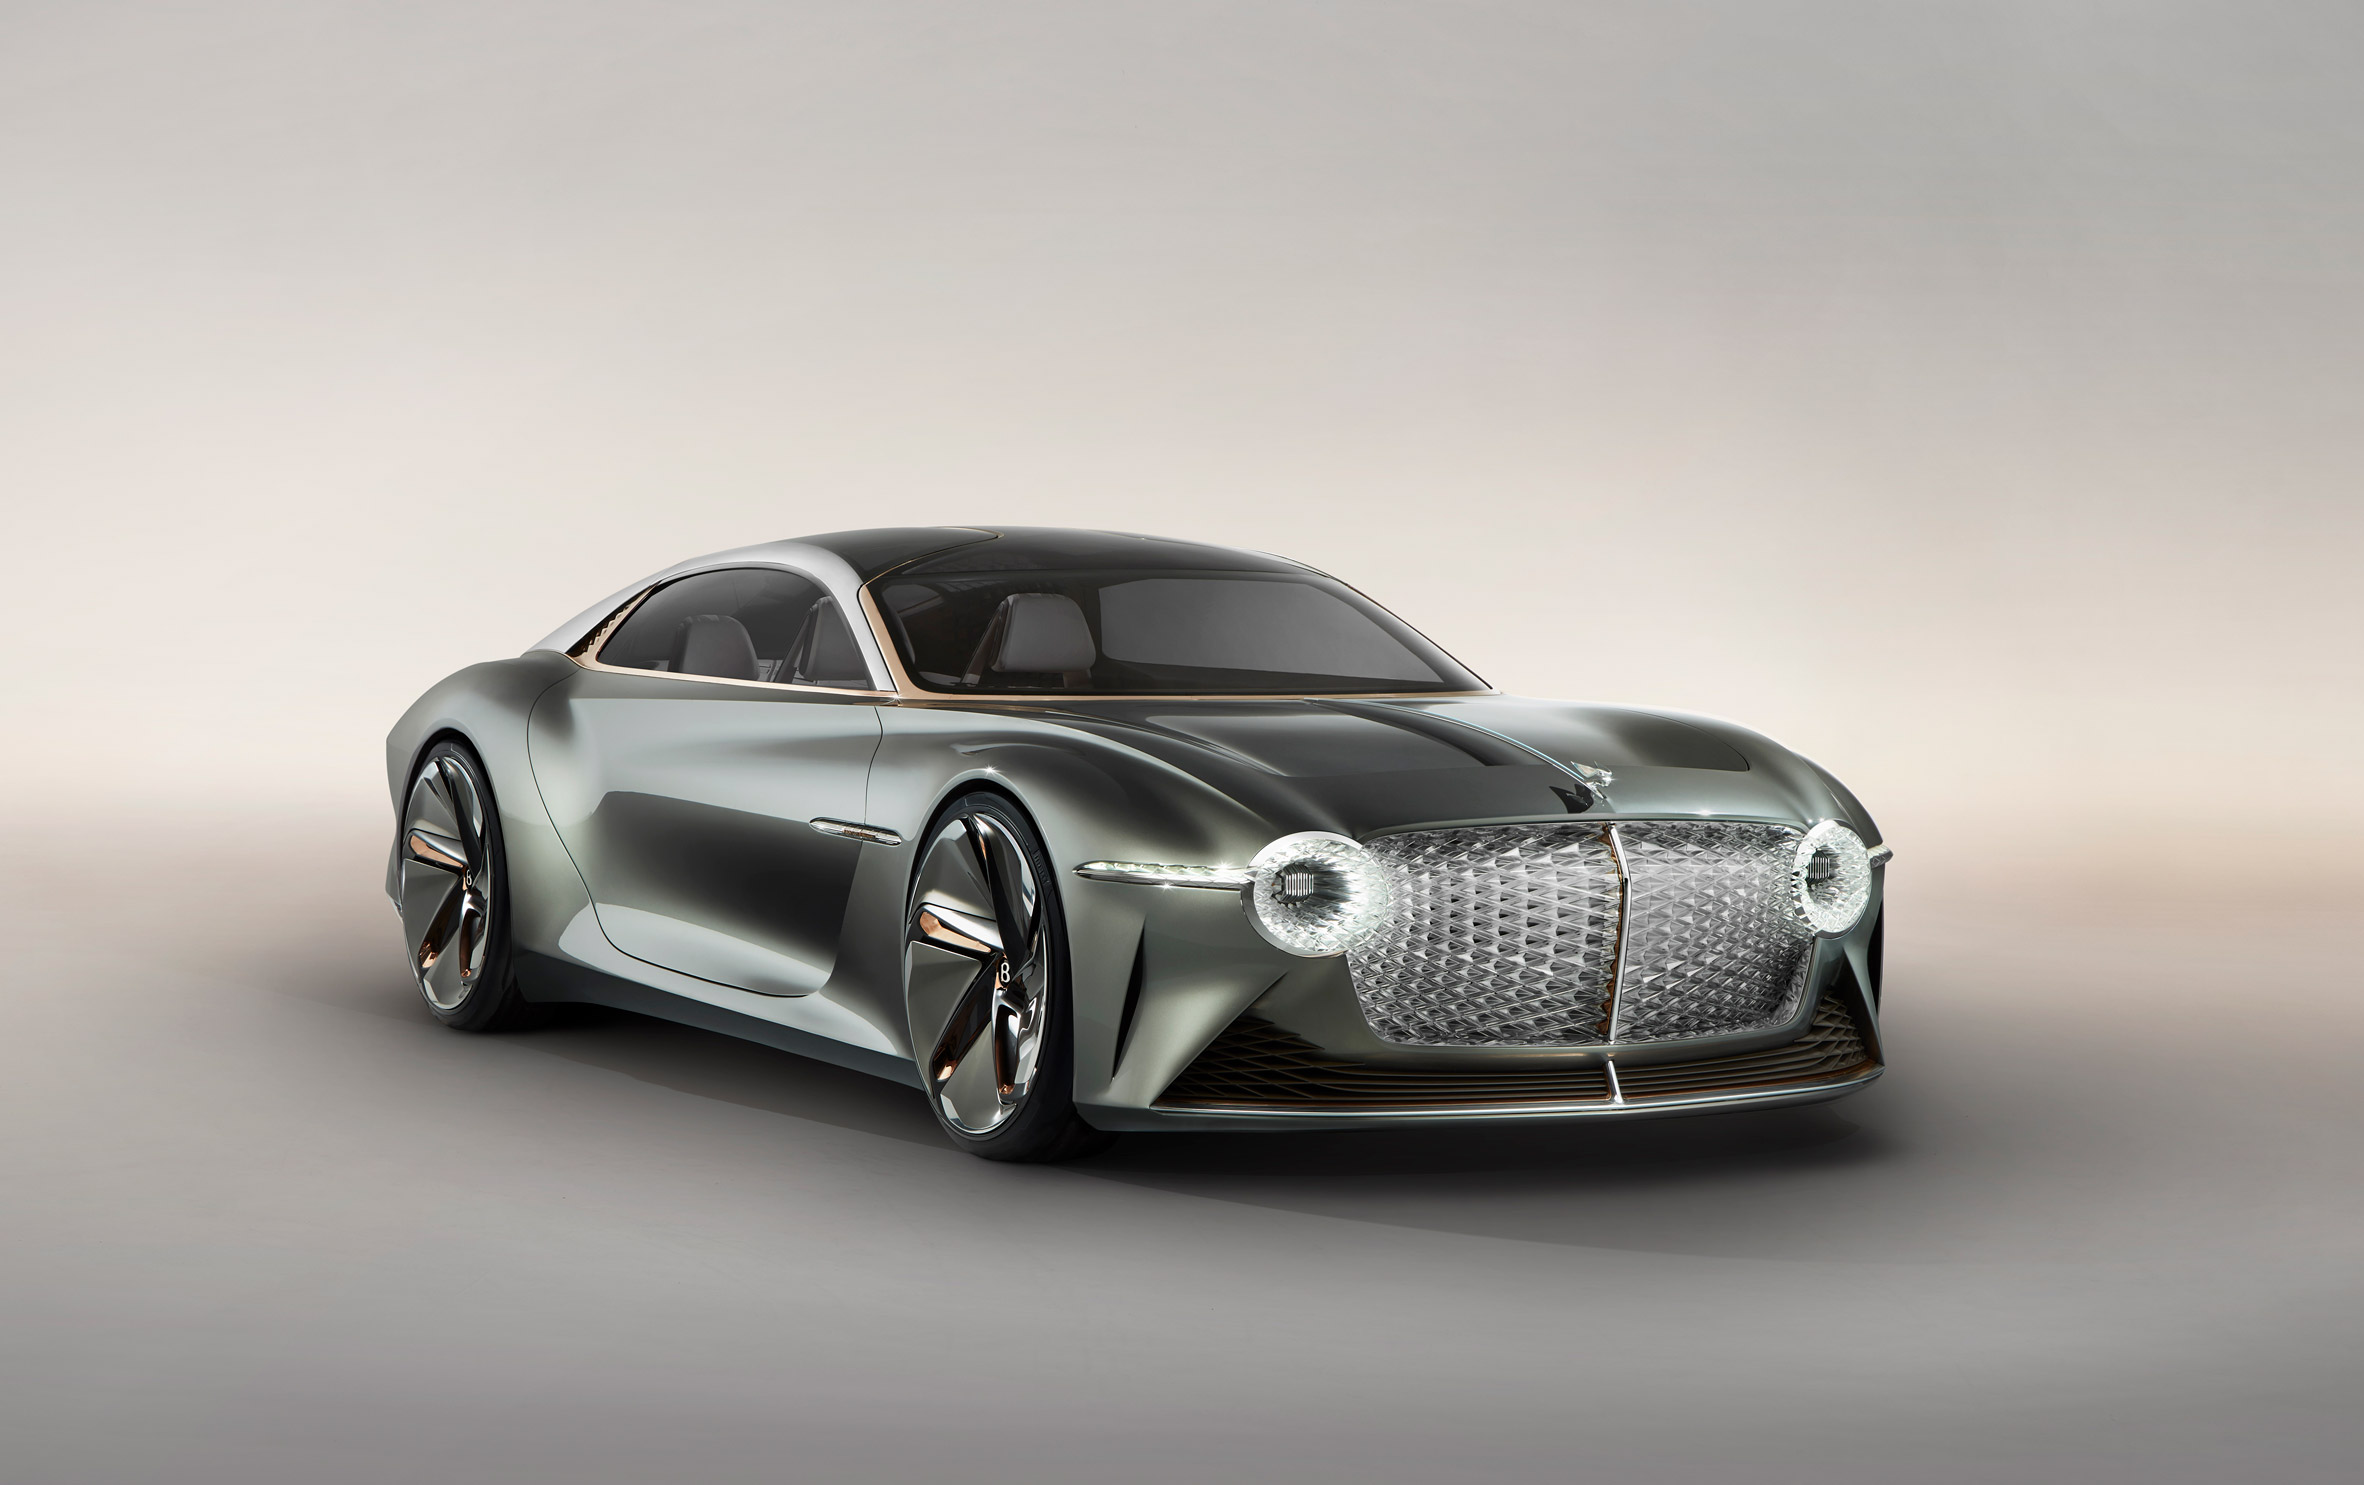 Bentley's sustainable EXP 100 GT concept reimagines grand touring for the year 2035